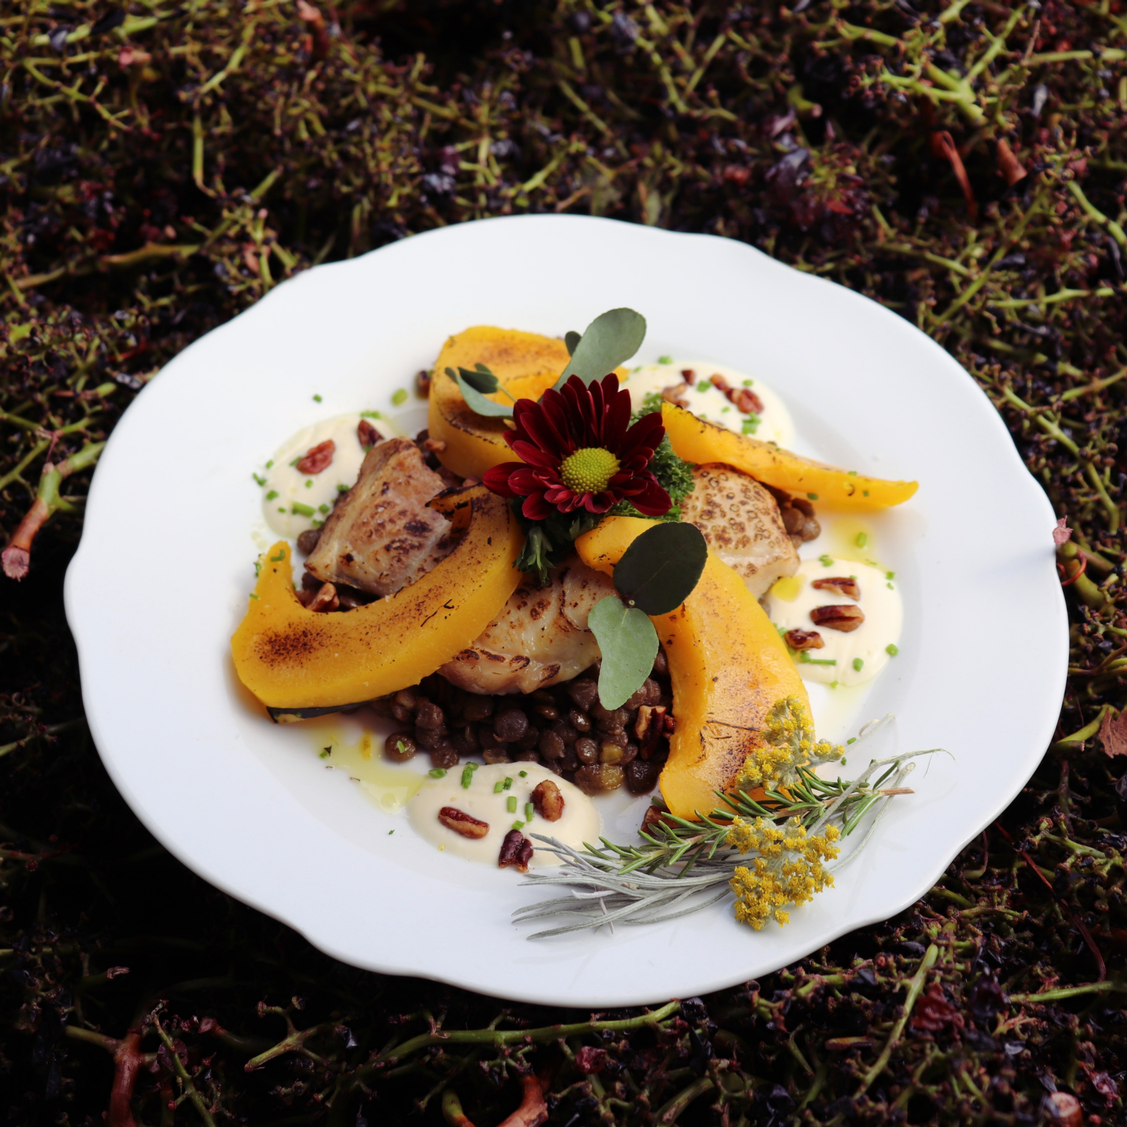 Oven Roasted Chicken with Green Lentils & Carnival Squash